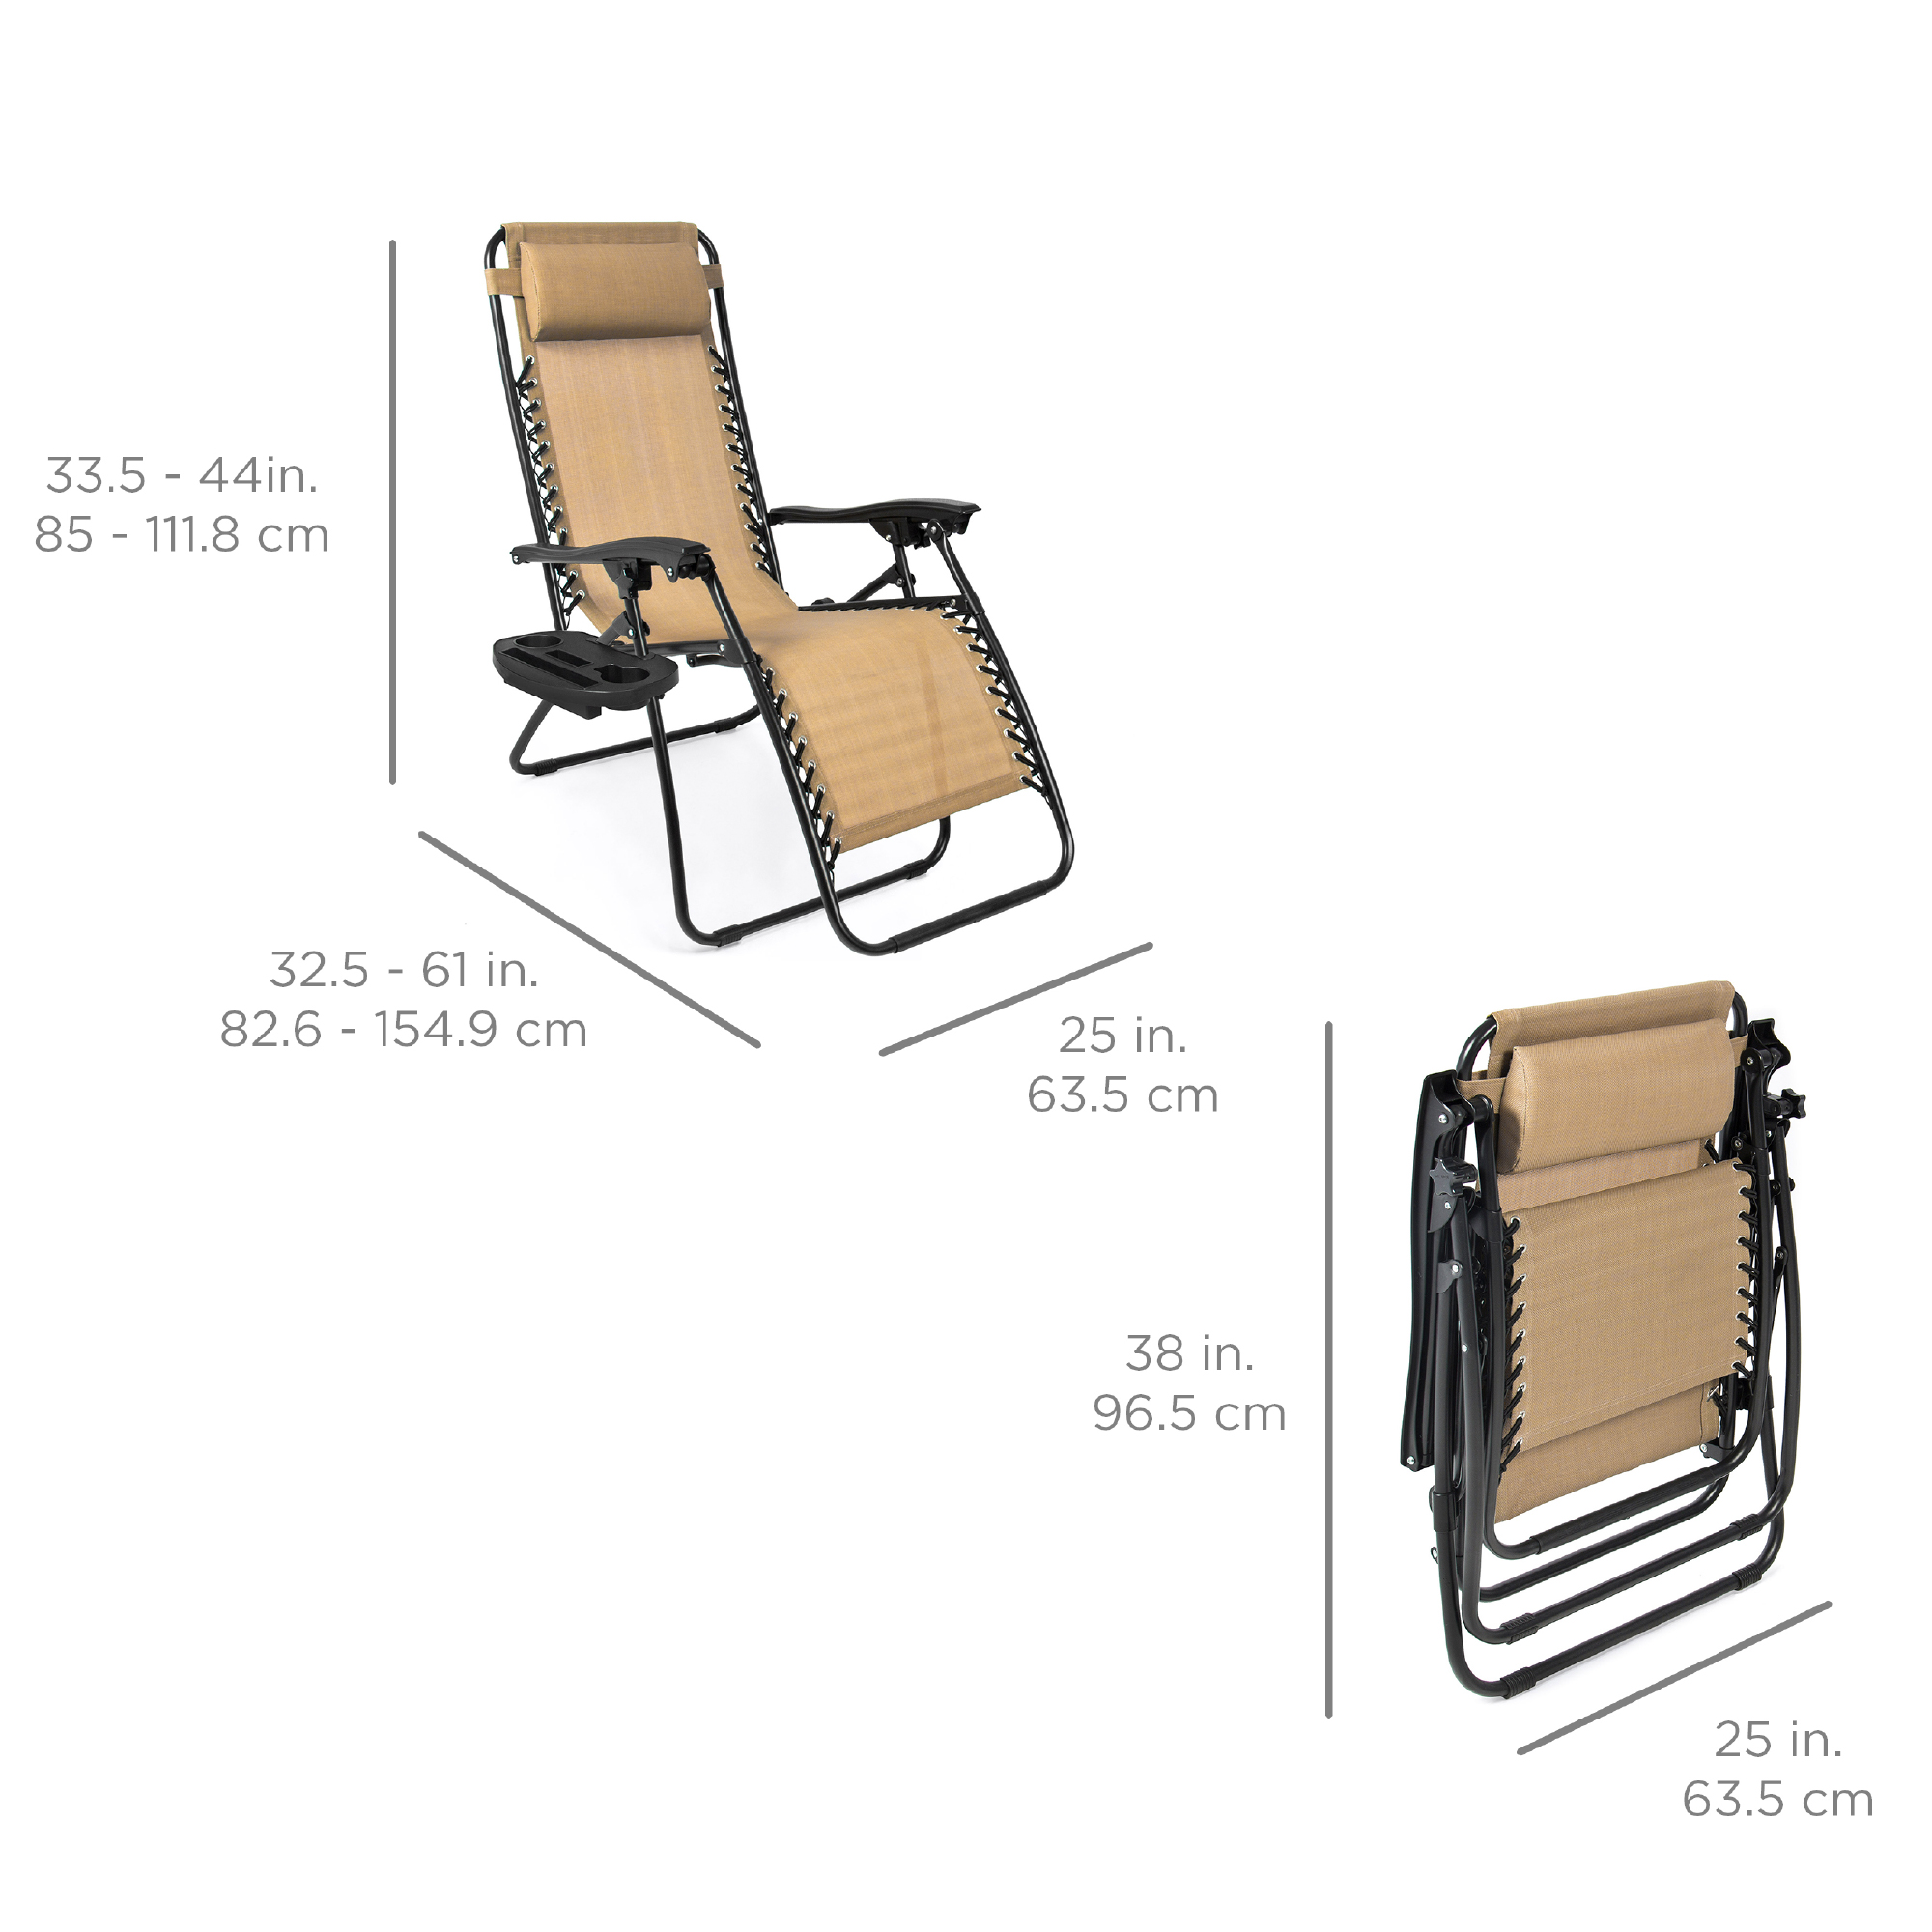 Best Choice Products Set of 2 Zero Gravity Lounge Chair Recliners for Patio, Pool w/ Cup Holder Tray - Beige - image 8 of 9